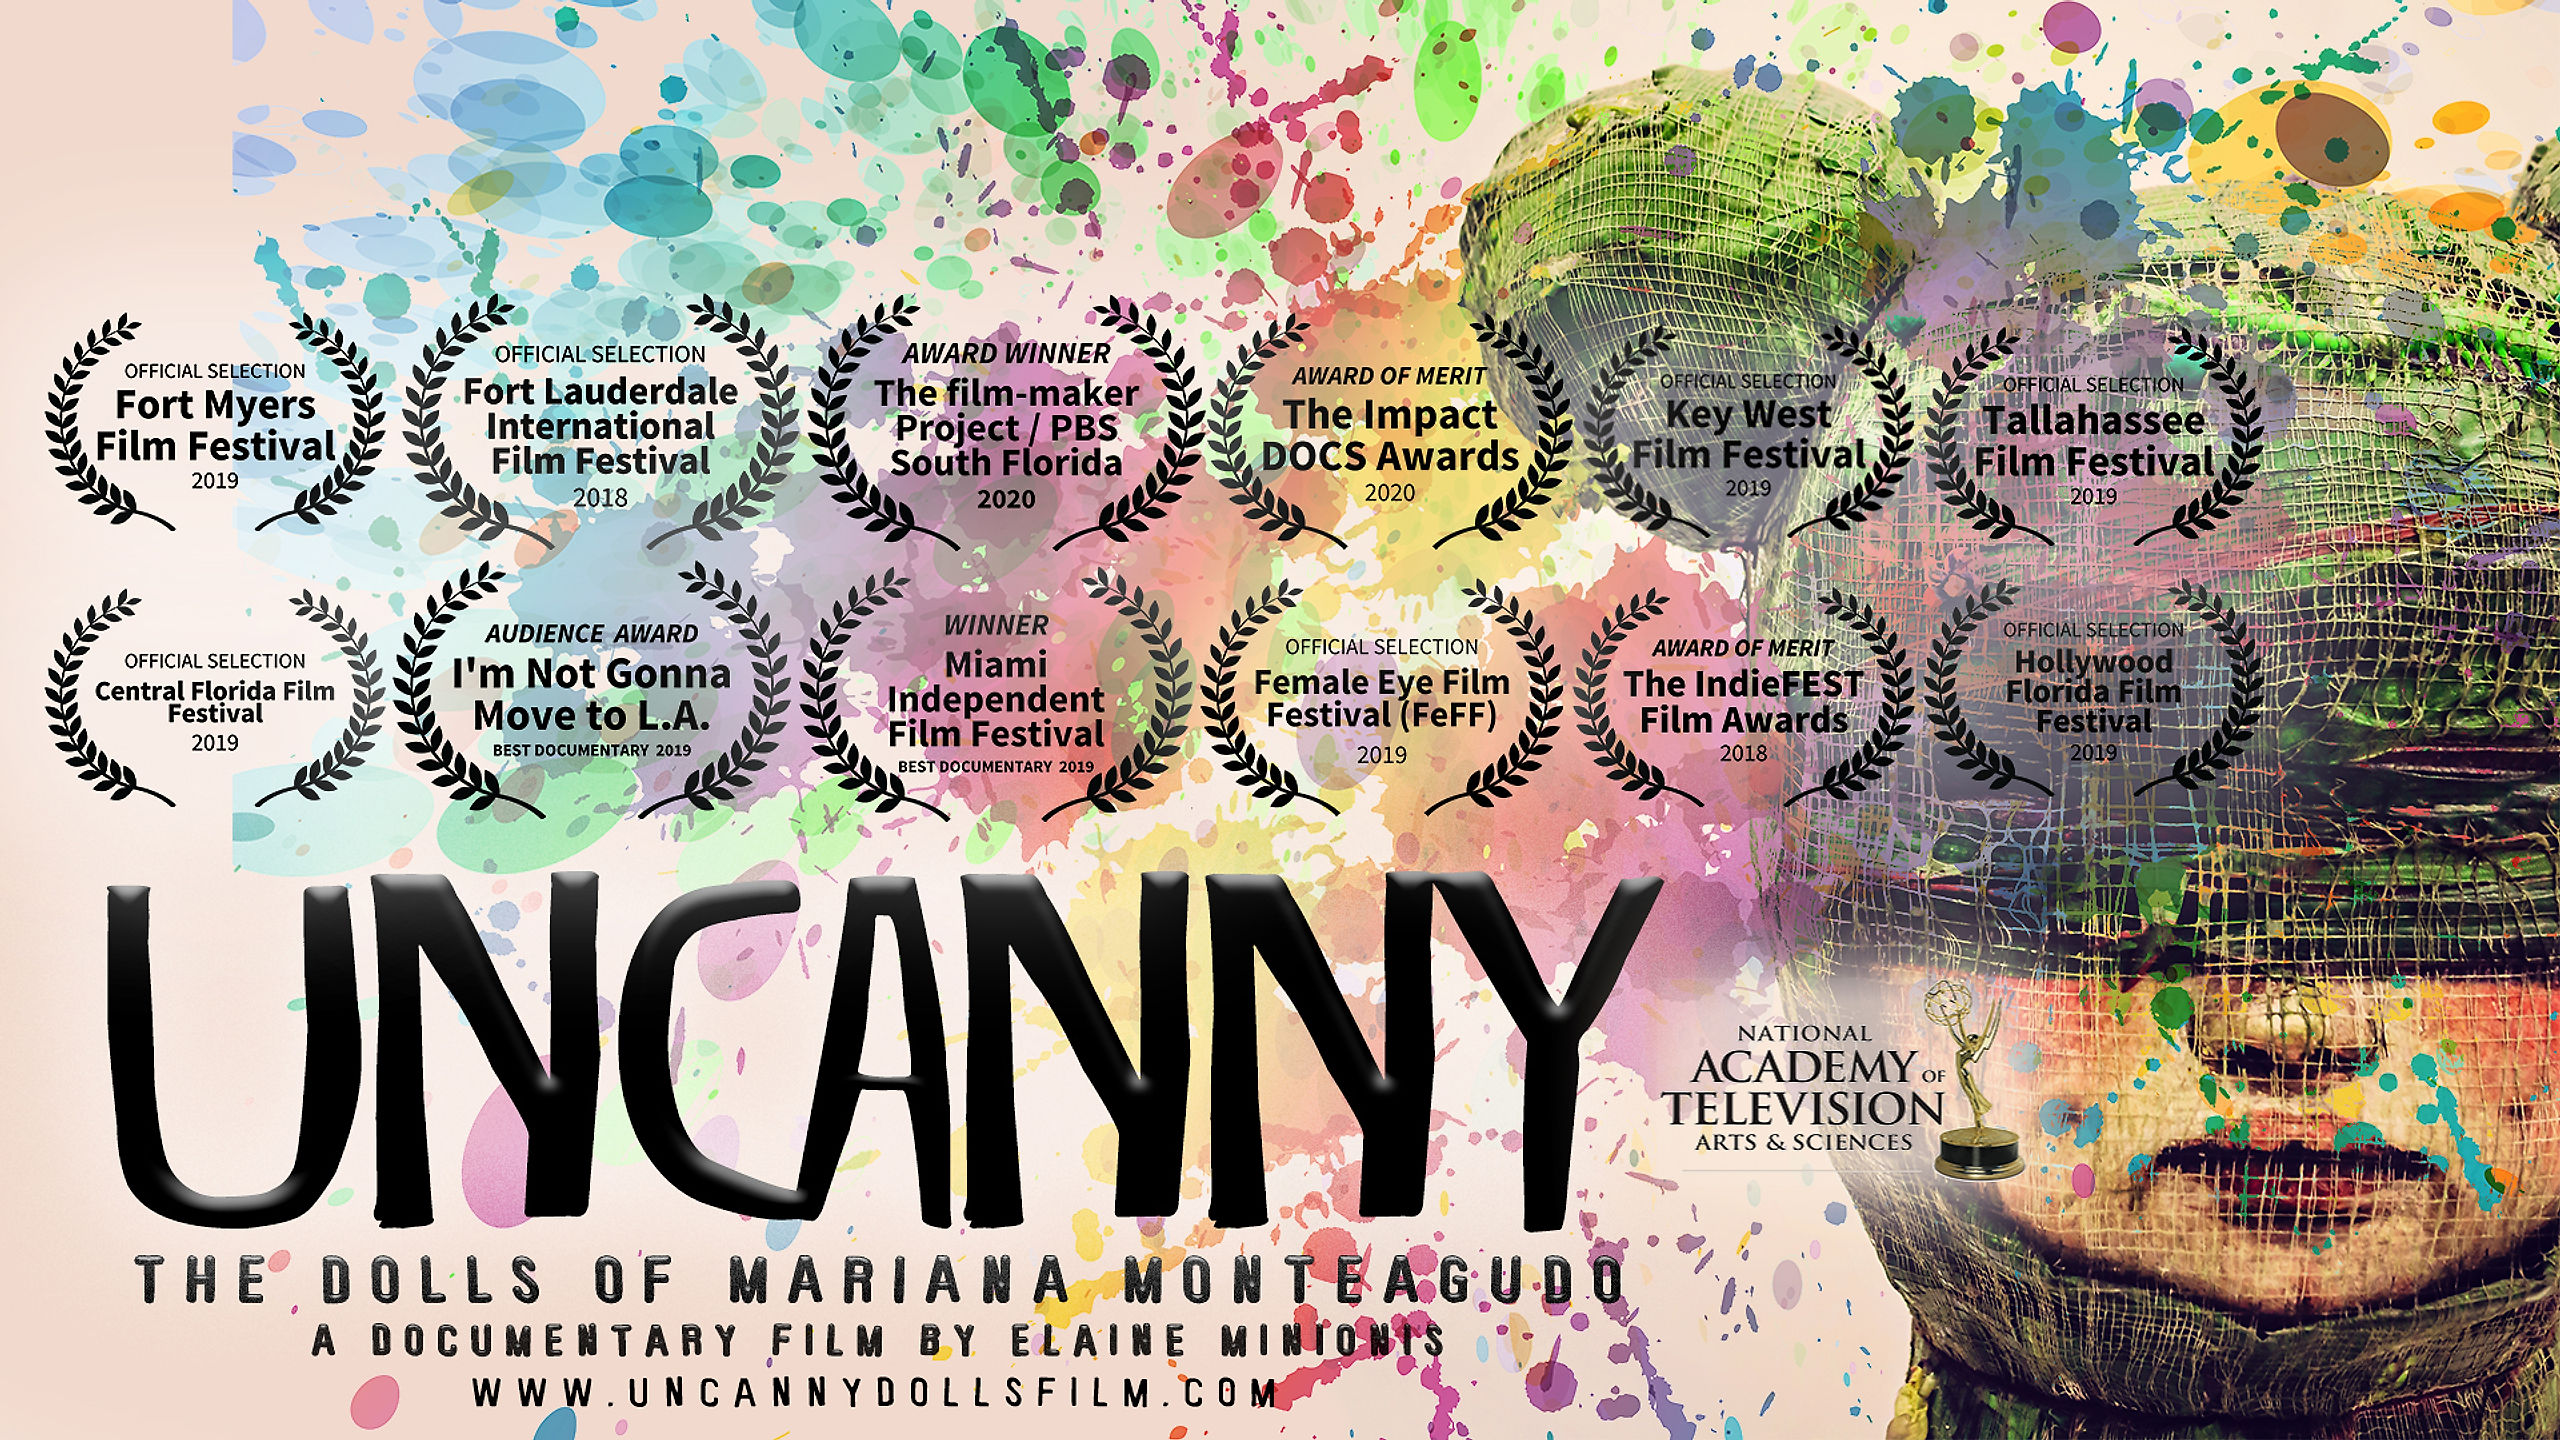 (Official Trailer) "UNCANNY: The Dolls of Mariana Monteagudo". A documentary film by Elaine Minionis